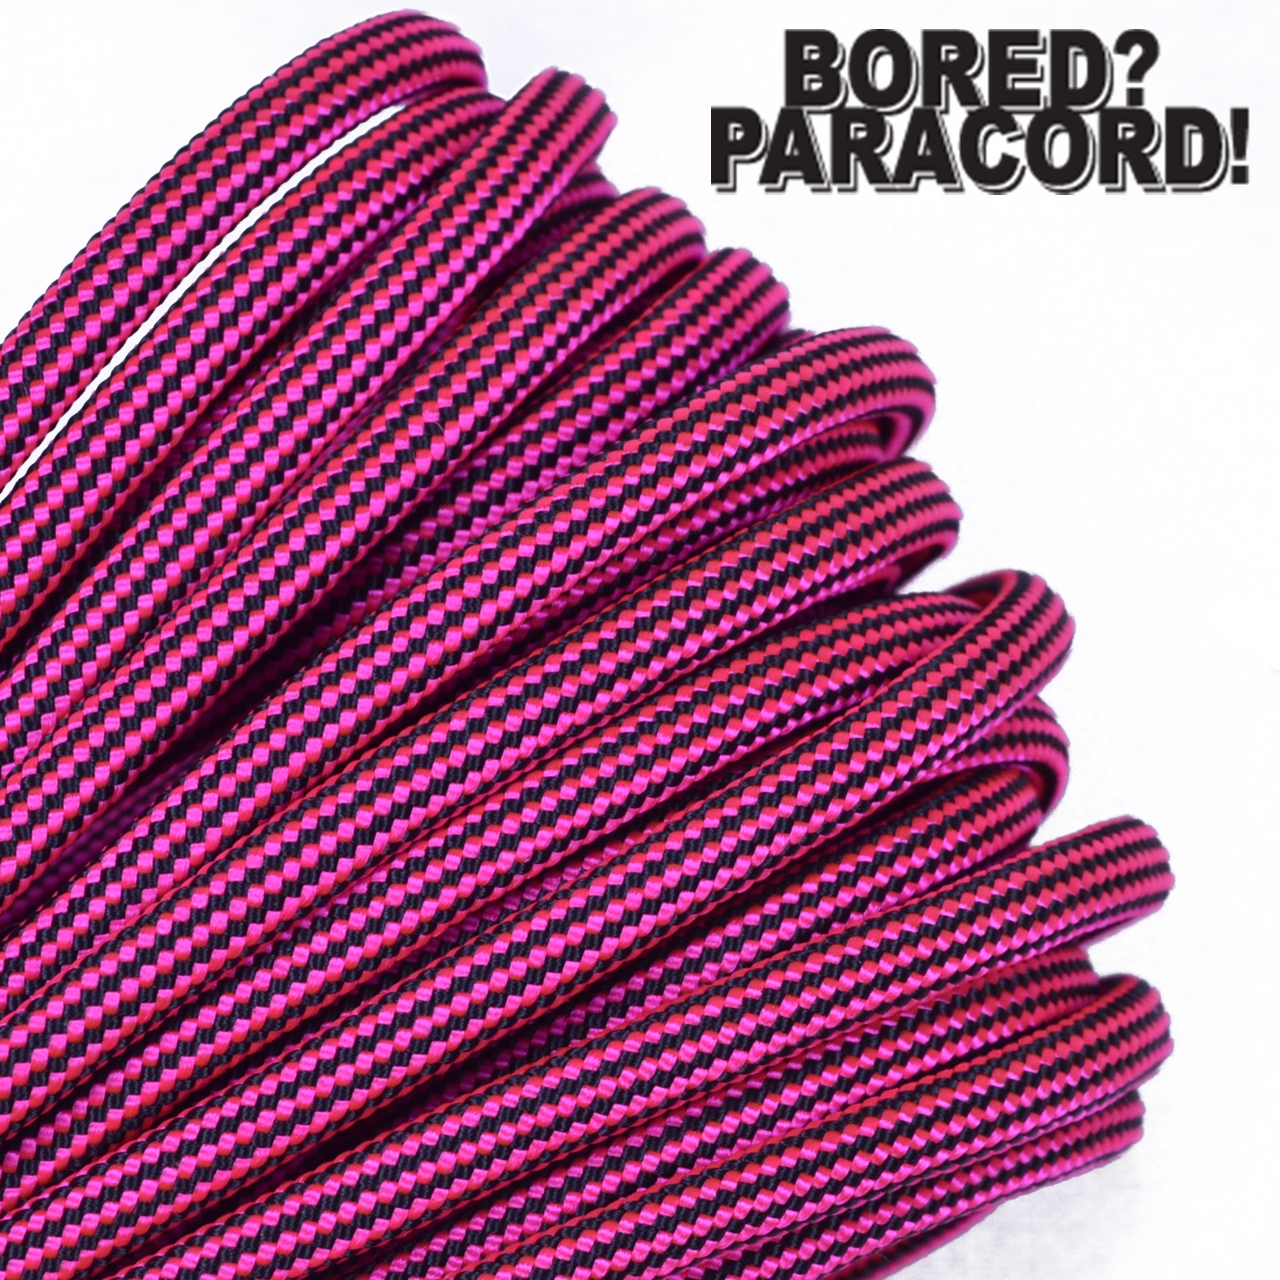 Bored Paracord Brand 550 lb Type III Paracord - Neon Pink With Black Stripes 50 Feet - image 1 of 1